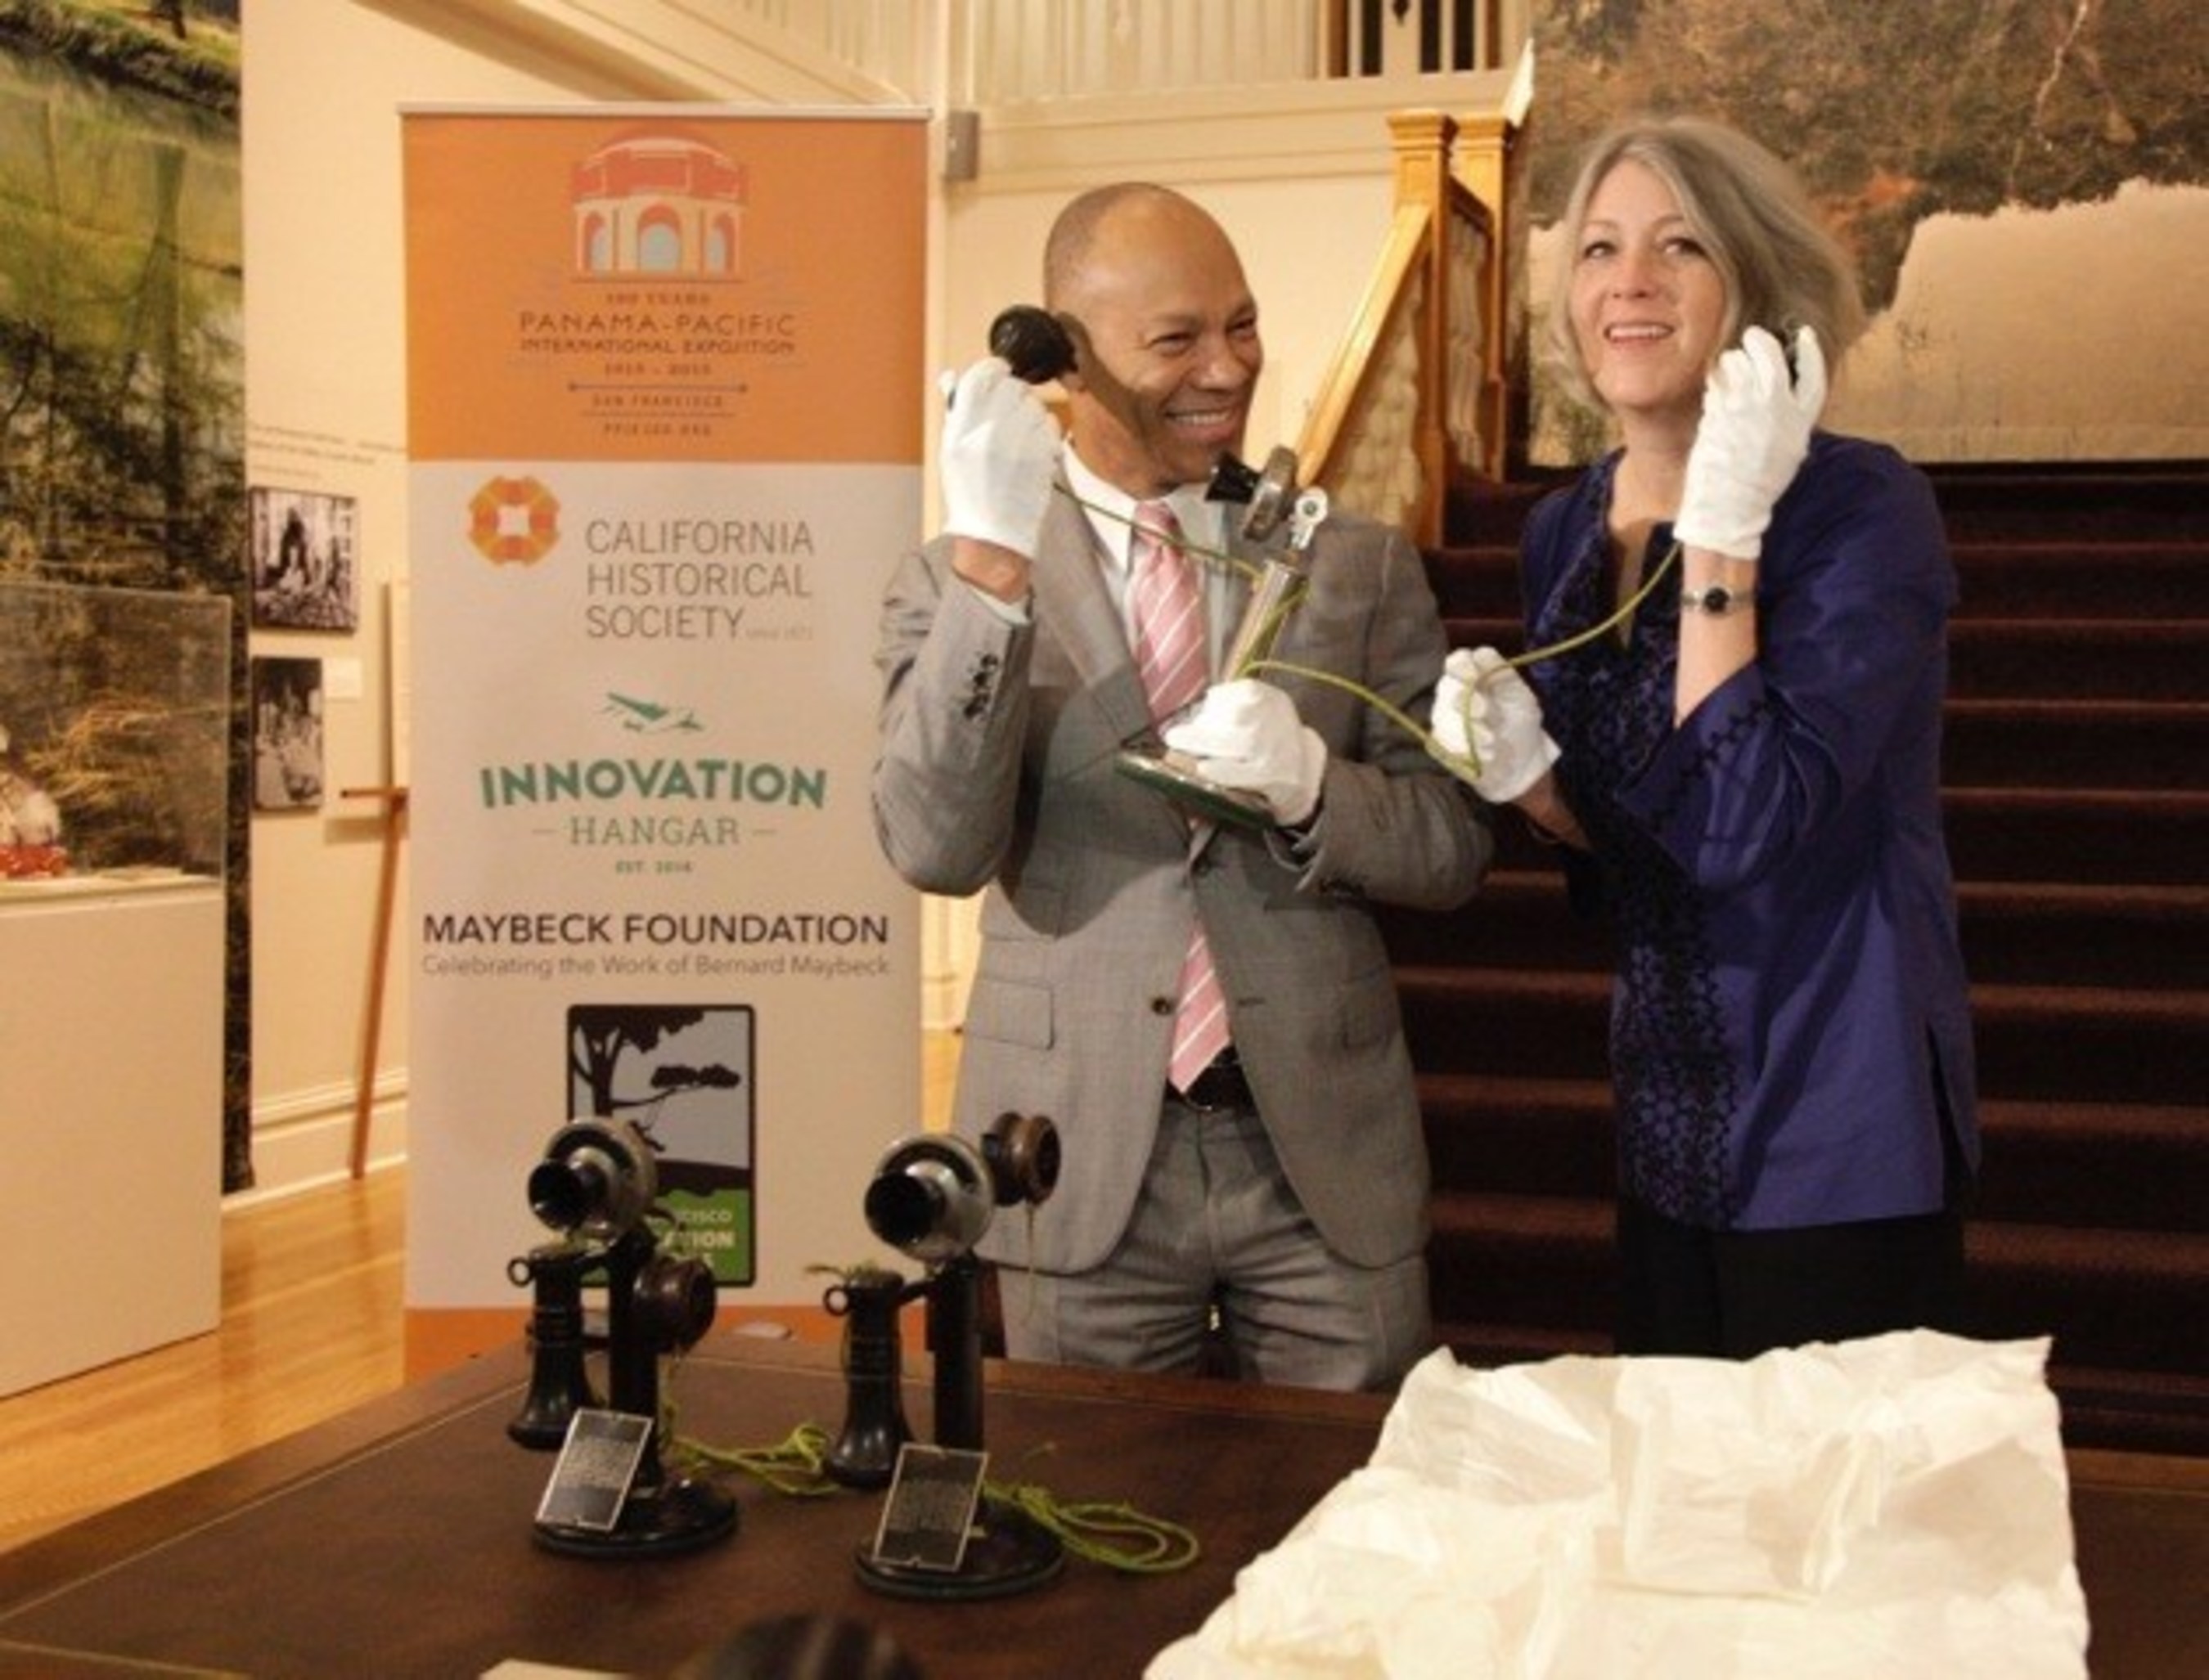 Ken McNeely, President of AT&T California and Dr. Anthea Hartig, Executive Director of the California Historical Society, unpack the original phone used by President Woodrow Wilson to make the first-ever transcontinental phone call on January 25, 1915. The four original phones used for the call were unveiled today and will be on display at the California Historical Society as part of its PPIE100 "City Rising: San Francisco and the 1915 World Fair" exhibition at 678 Mission Street which officially opens on February 22nd in San Francisco. City Rising, will also feature a sister exhibition at the Palace of Fine Arts which opens February 21st as part of a city-wide celebration and community day at the Palace that marks the 100th anniversary of the 1915 World's Fair. Photo Source: Michael Tweed